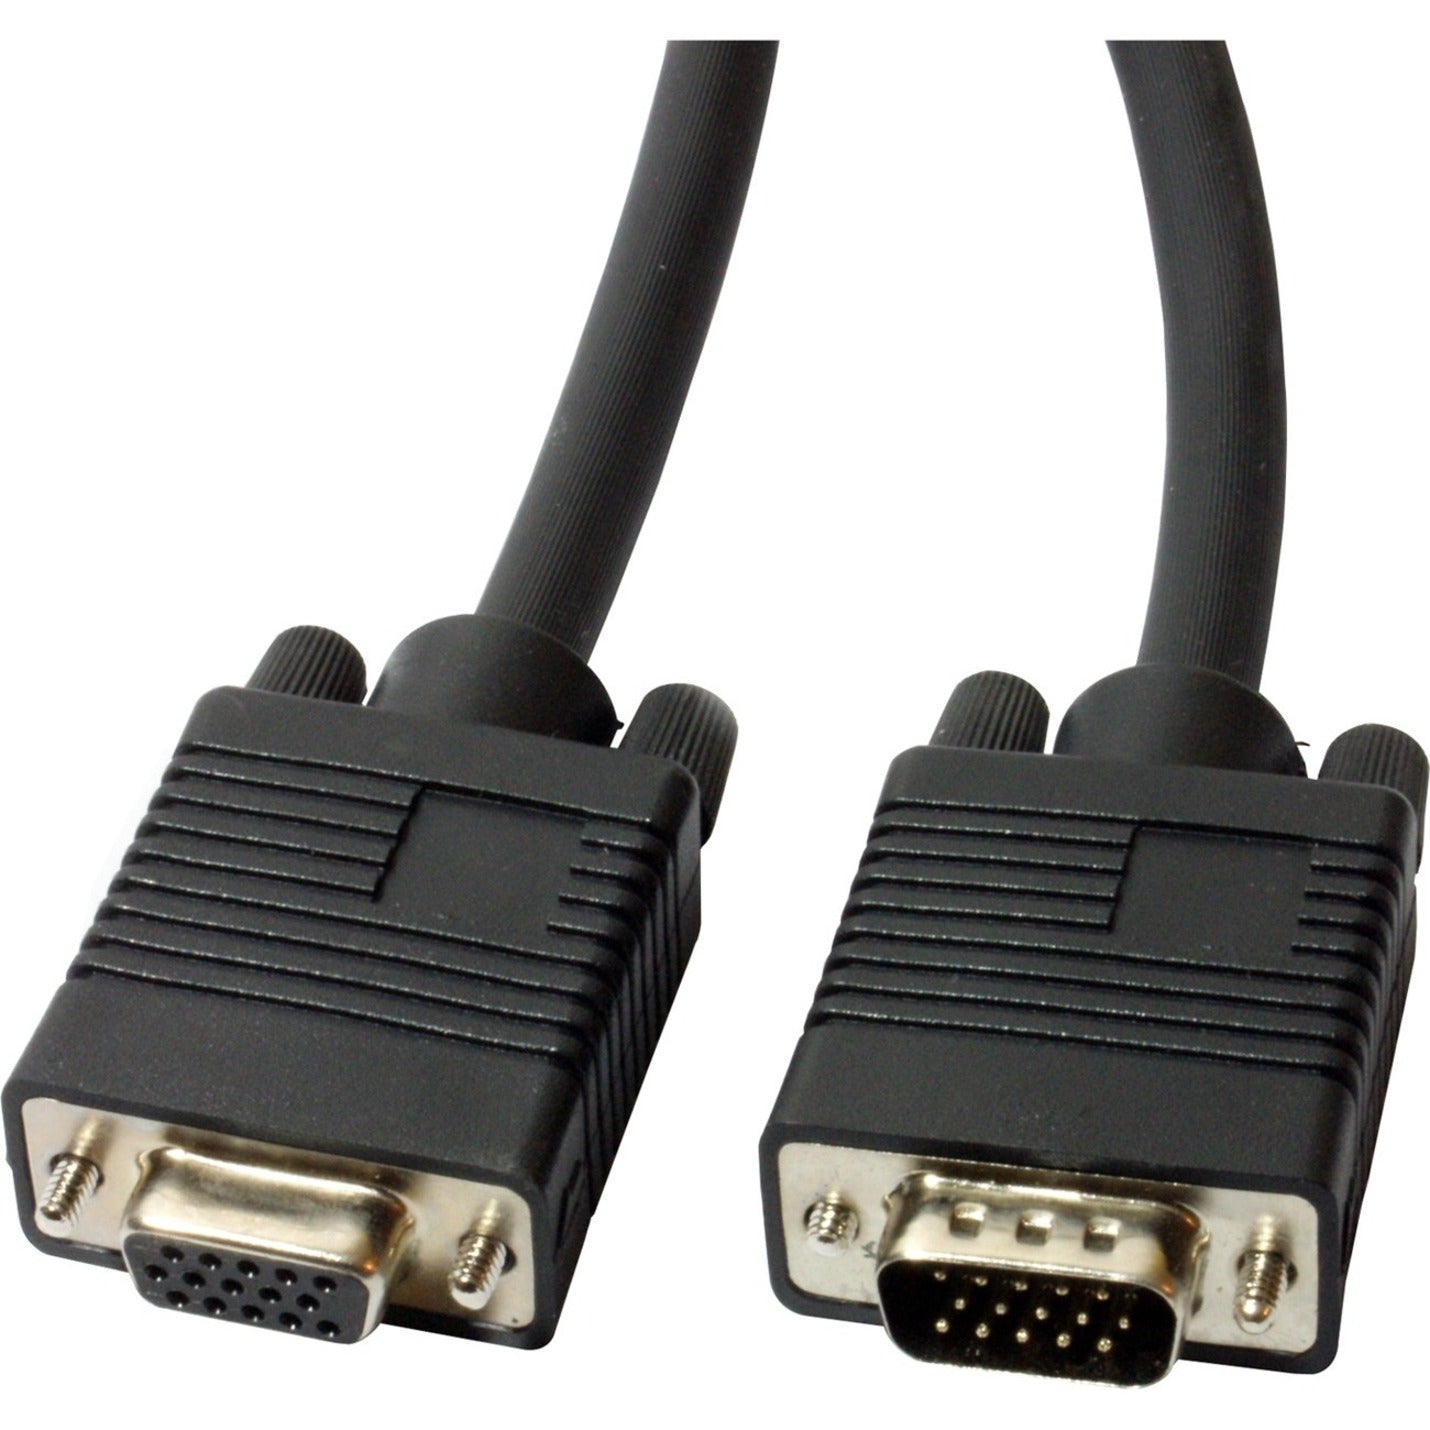 4XEM 4XVGAMF3FT 3FT VGA Extension Cable, Molded, Shielded, 1920 x 1200 Supported Resolution